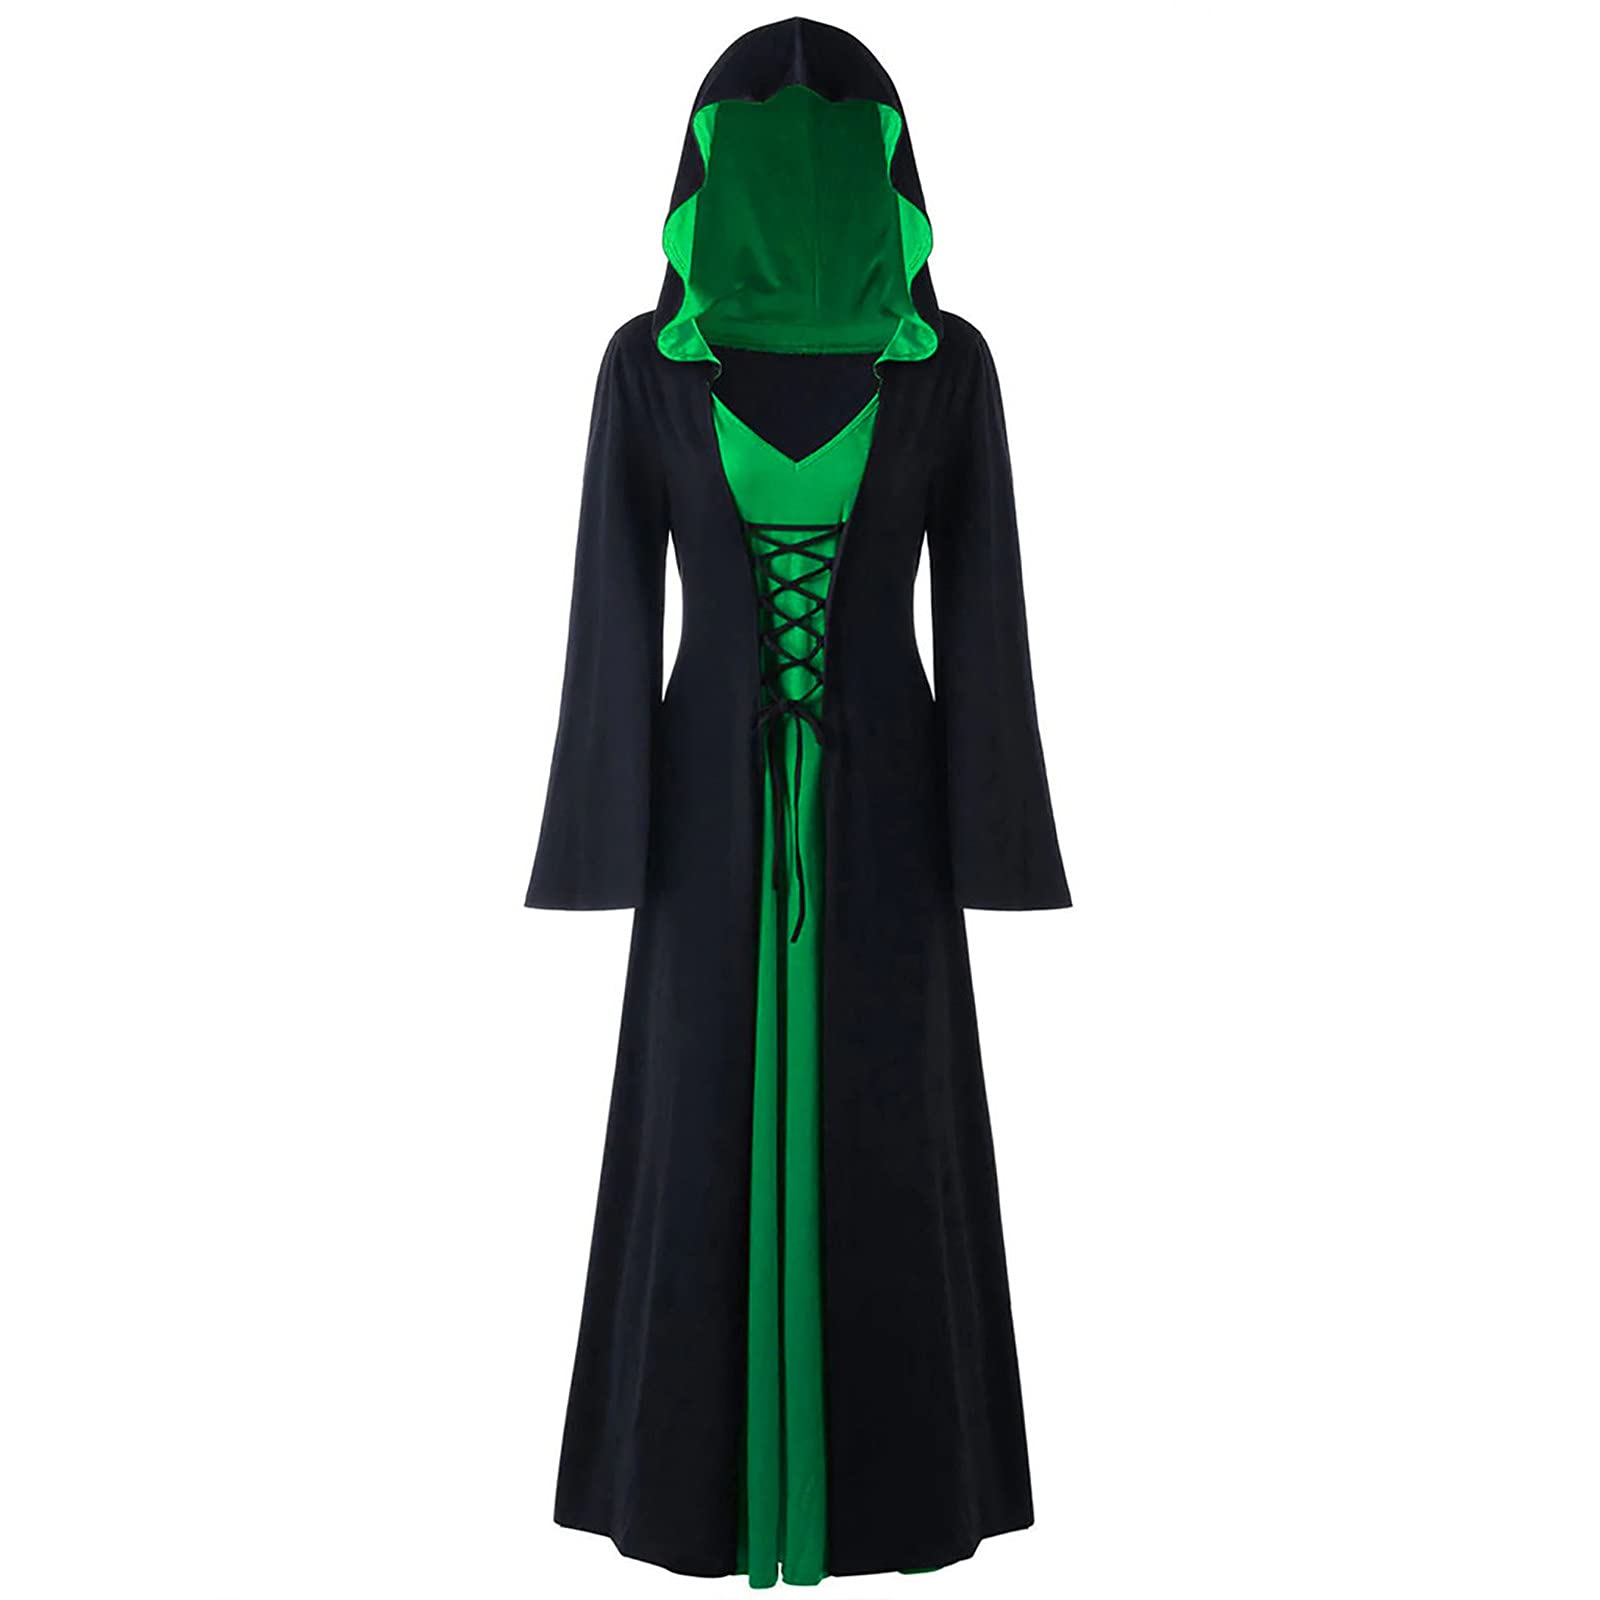 Renaissance Medieval Scary Vampire Cosplay Costume for Men - Adult